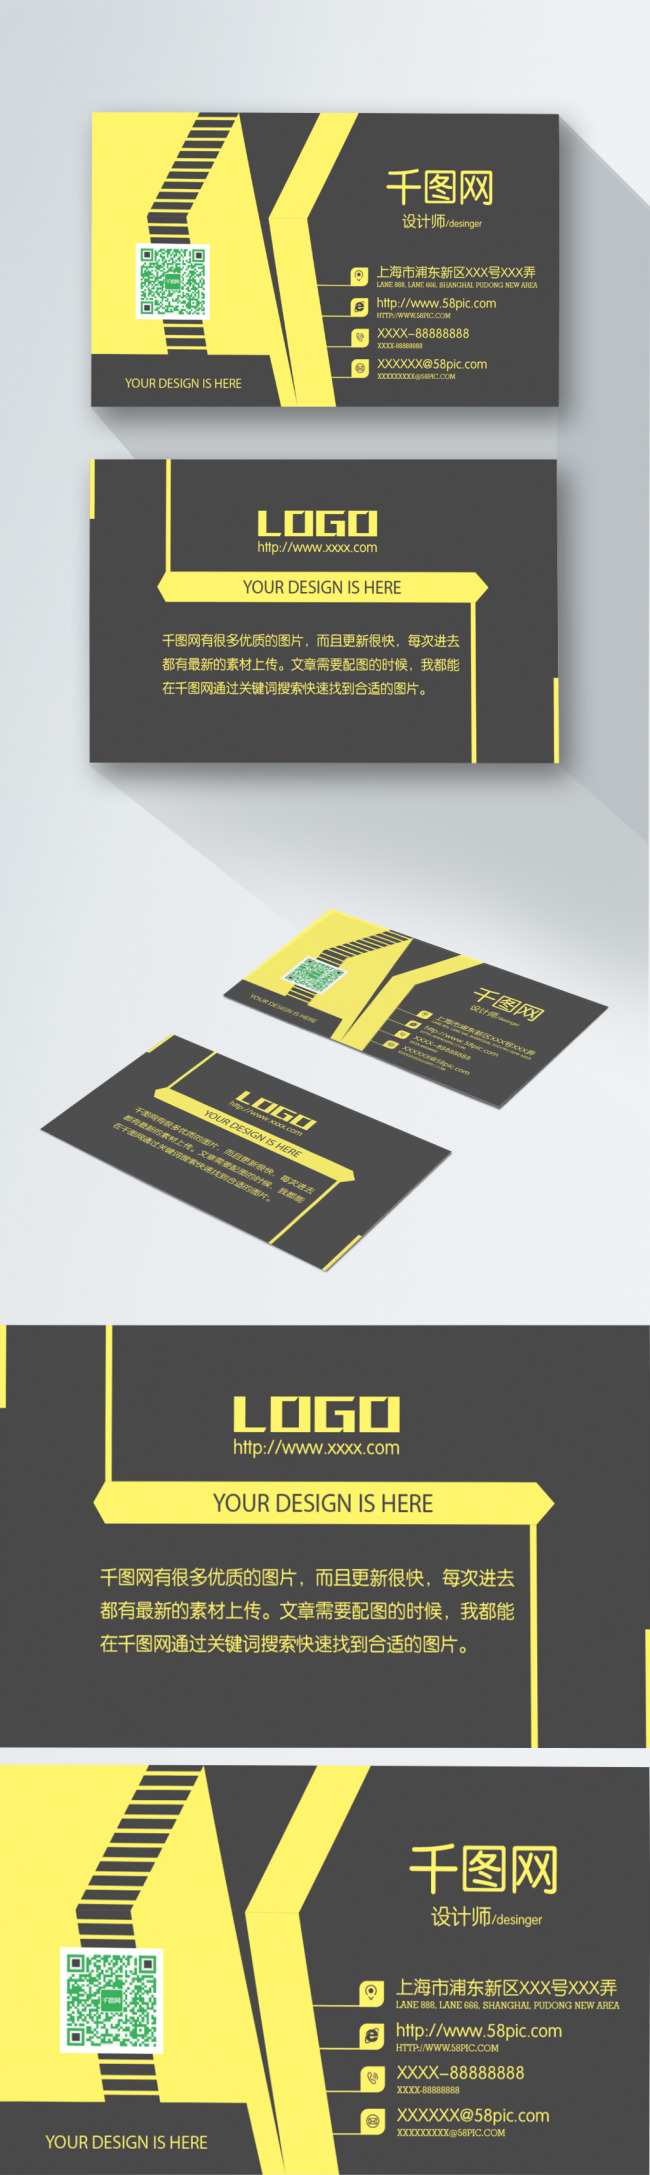 Download Yellow And Black Color Business Card Design Template Image Picture Free Download 401758126 Lovepik Com PSD Mockup Templates